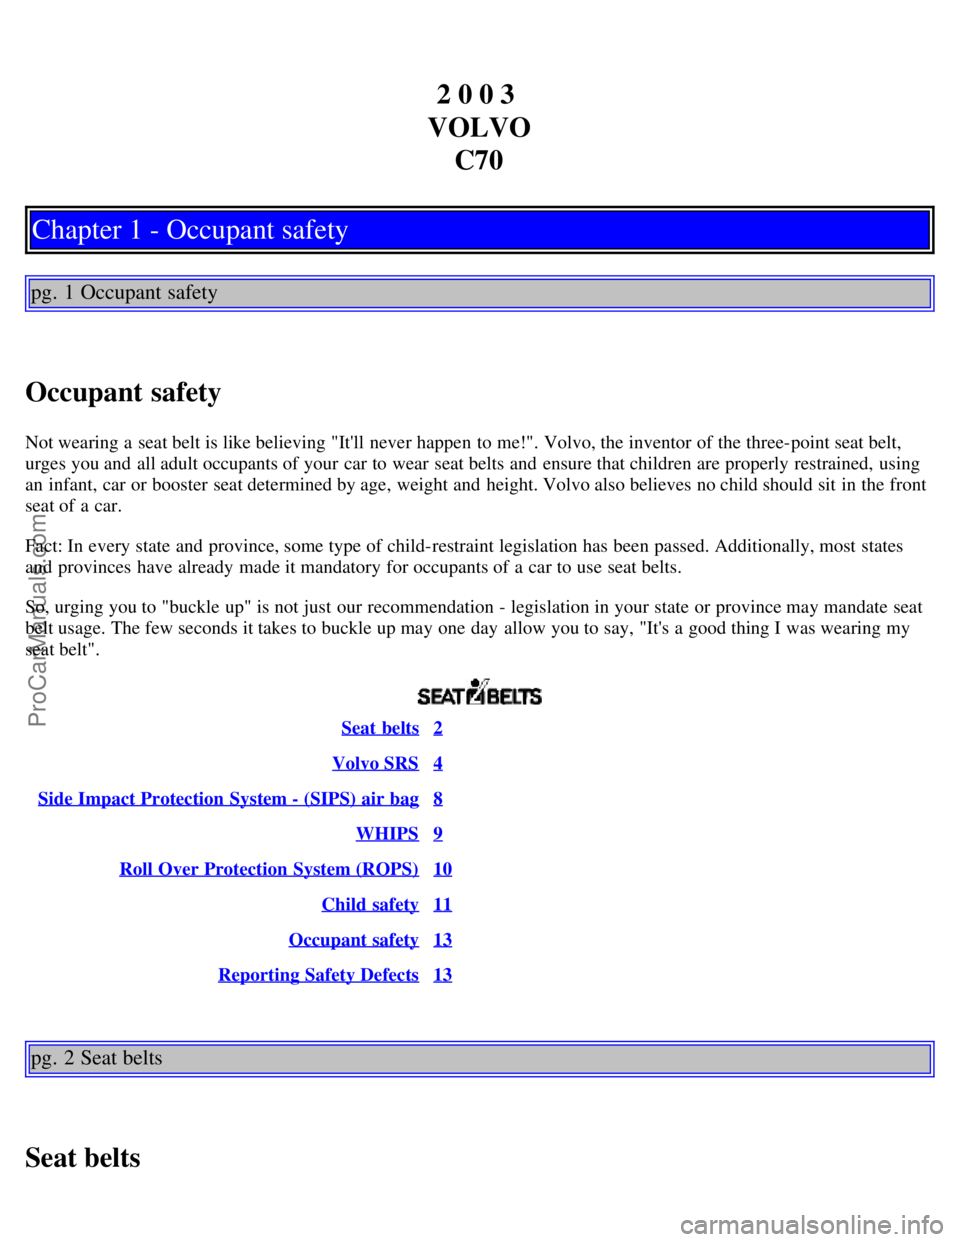 VOLVO C70 2003  Owners Manual 2 0 0 3 
VOLVO C70
Chapter 1 - Occupant safety
pg. 1 Occupant safety
Occupant safety
Not wearing a  seat belt is like believing "Itll  never happen to me!". Volvo, the inventor of the three-point sea